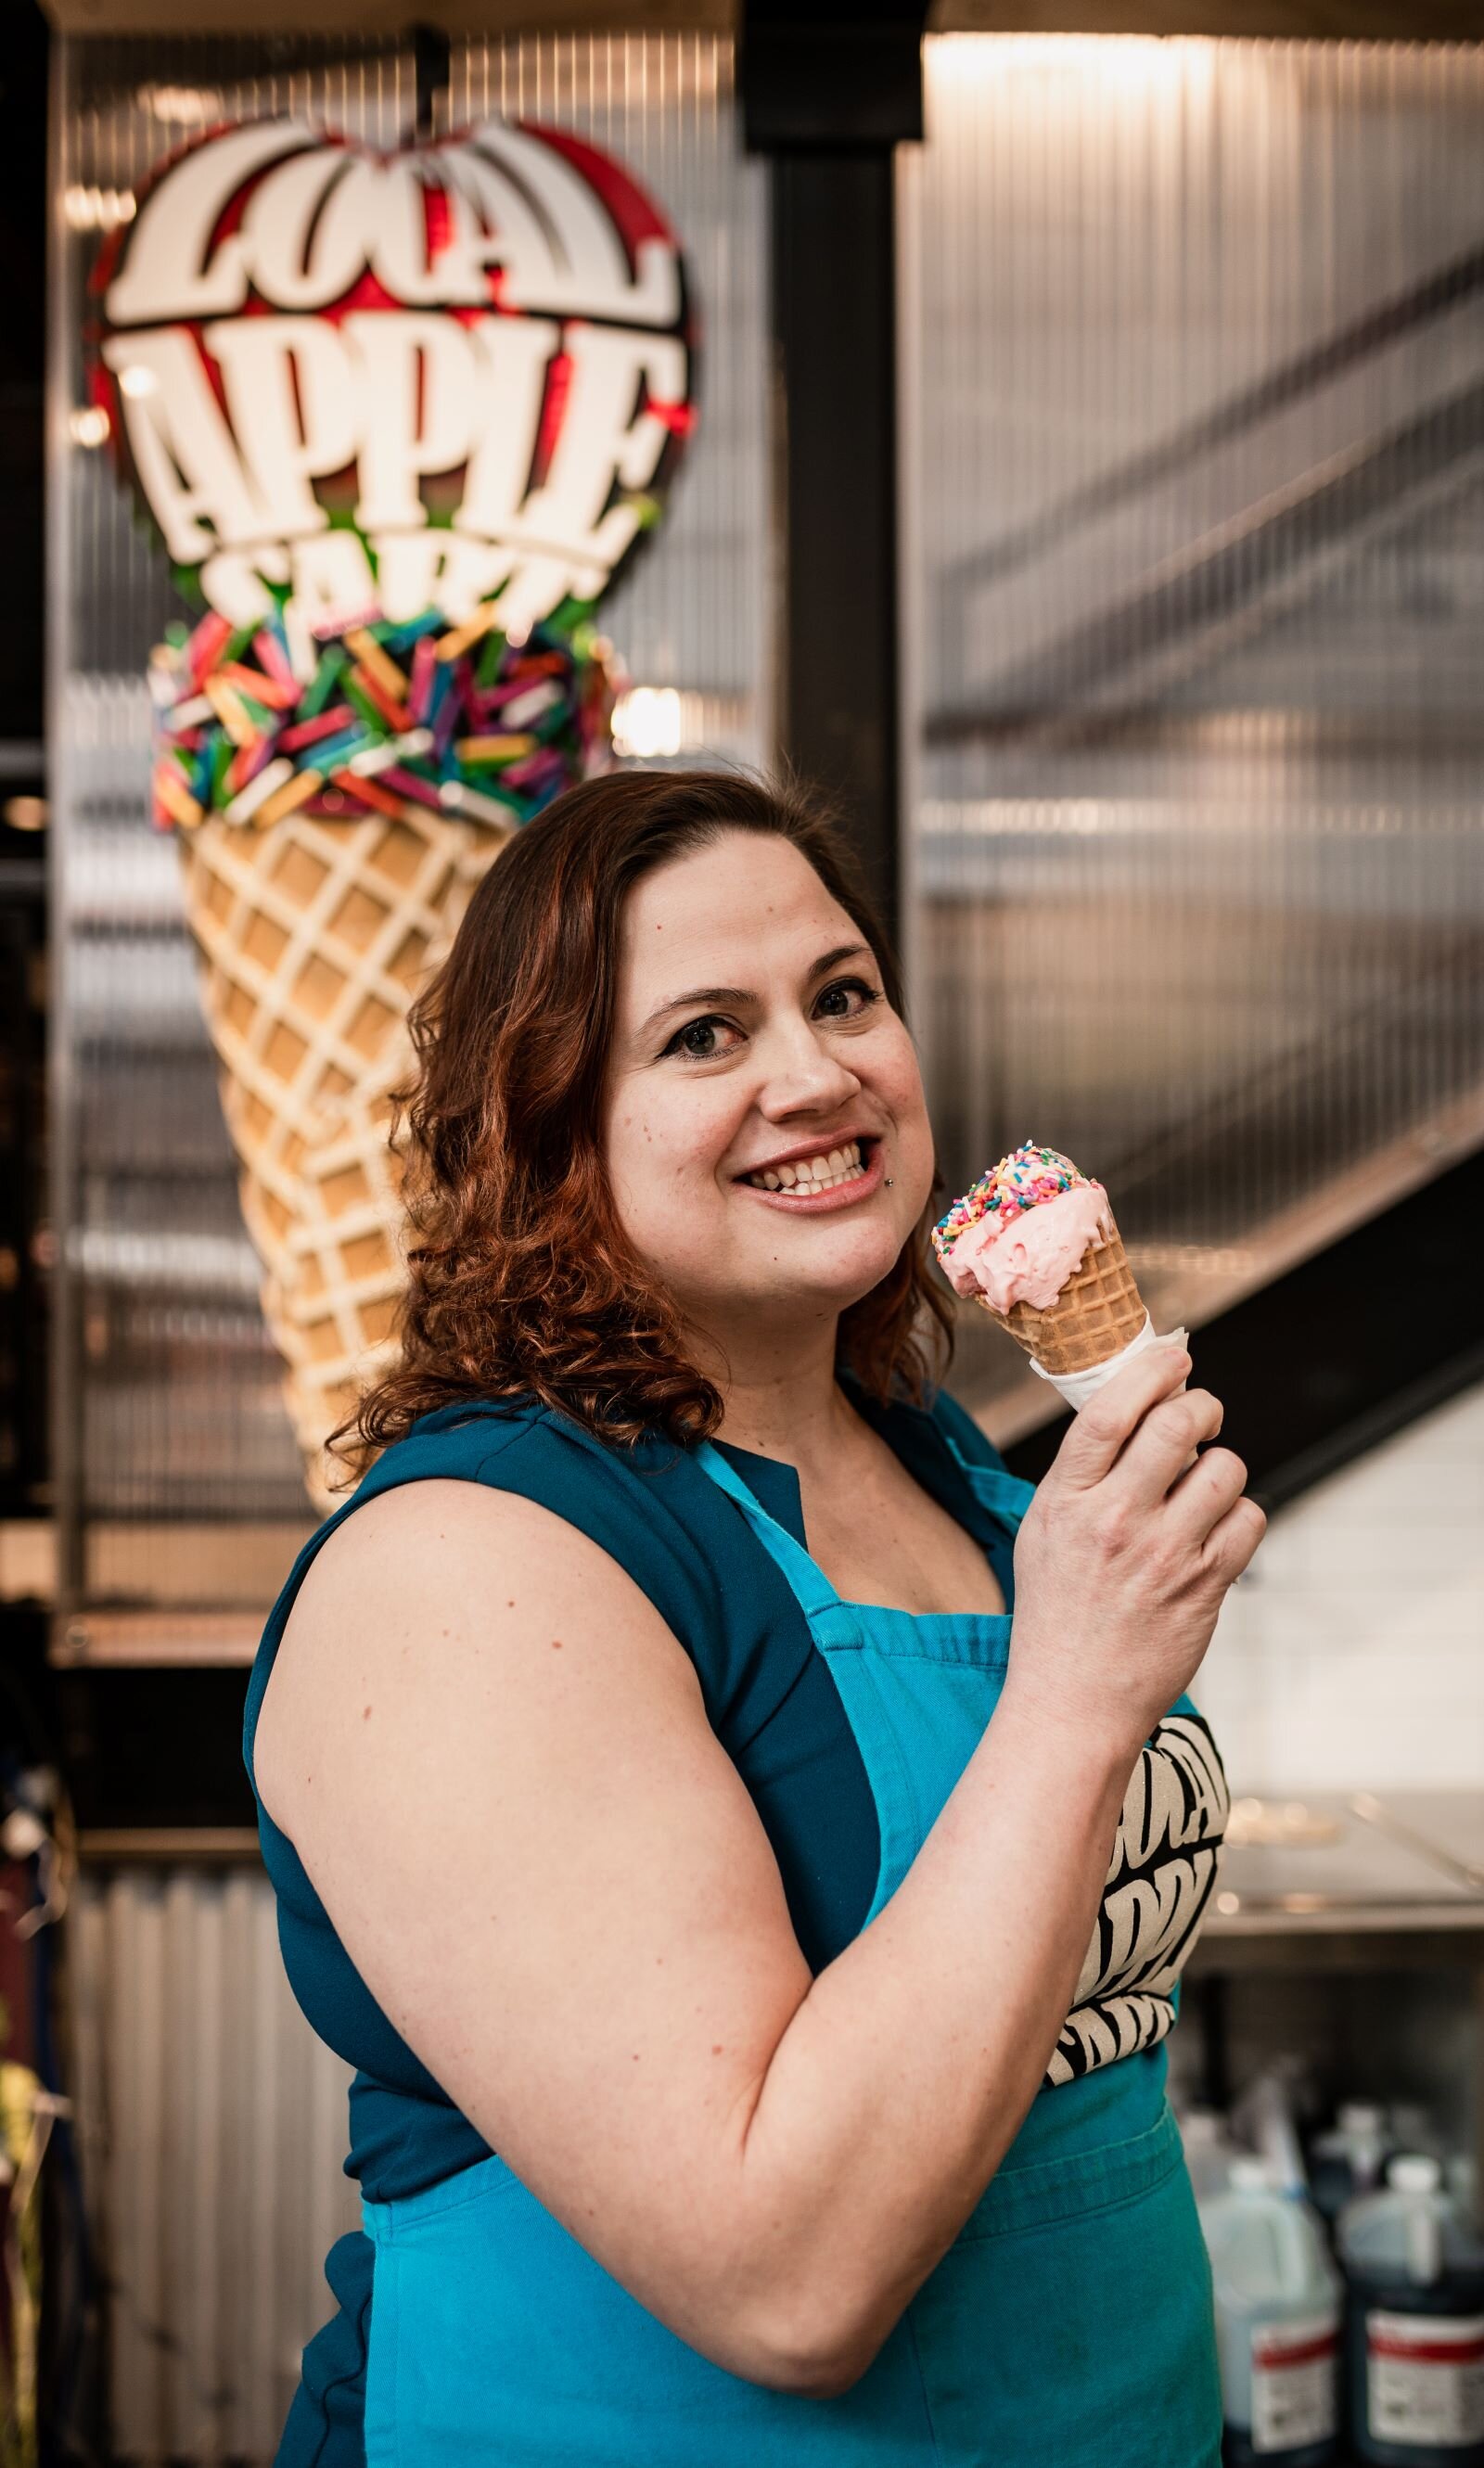 Rachel Nally is the entrepreneur behind Local Apple Cart, which makes all its ice cream in-house with local ingredients.